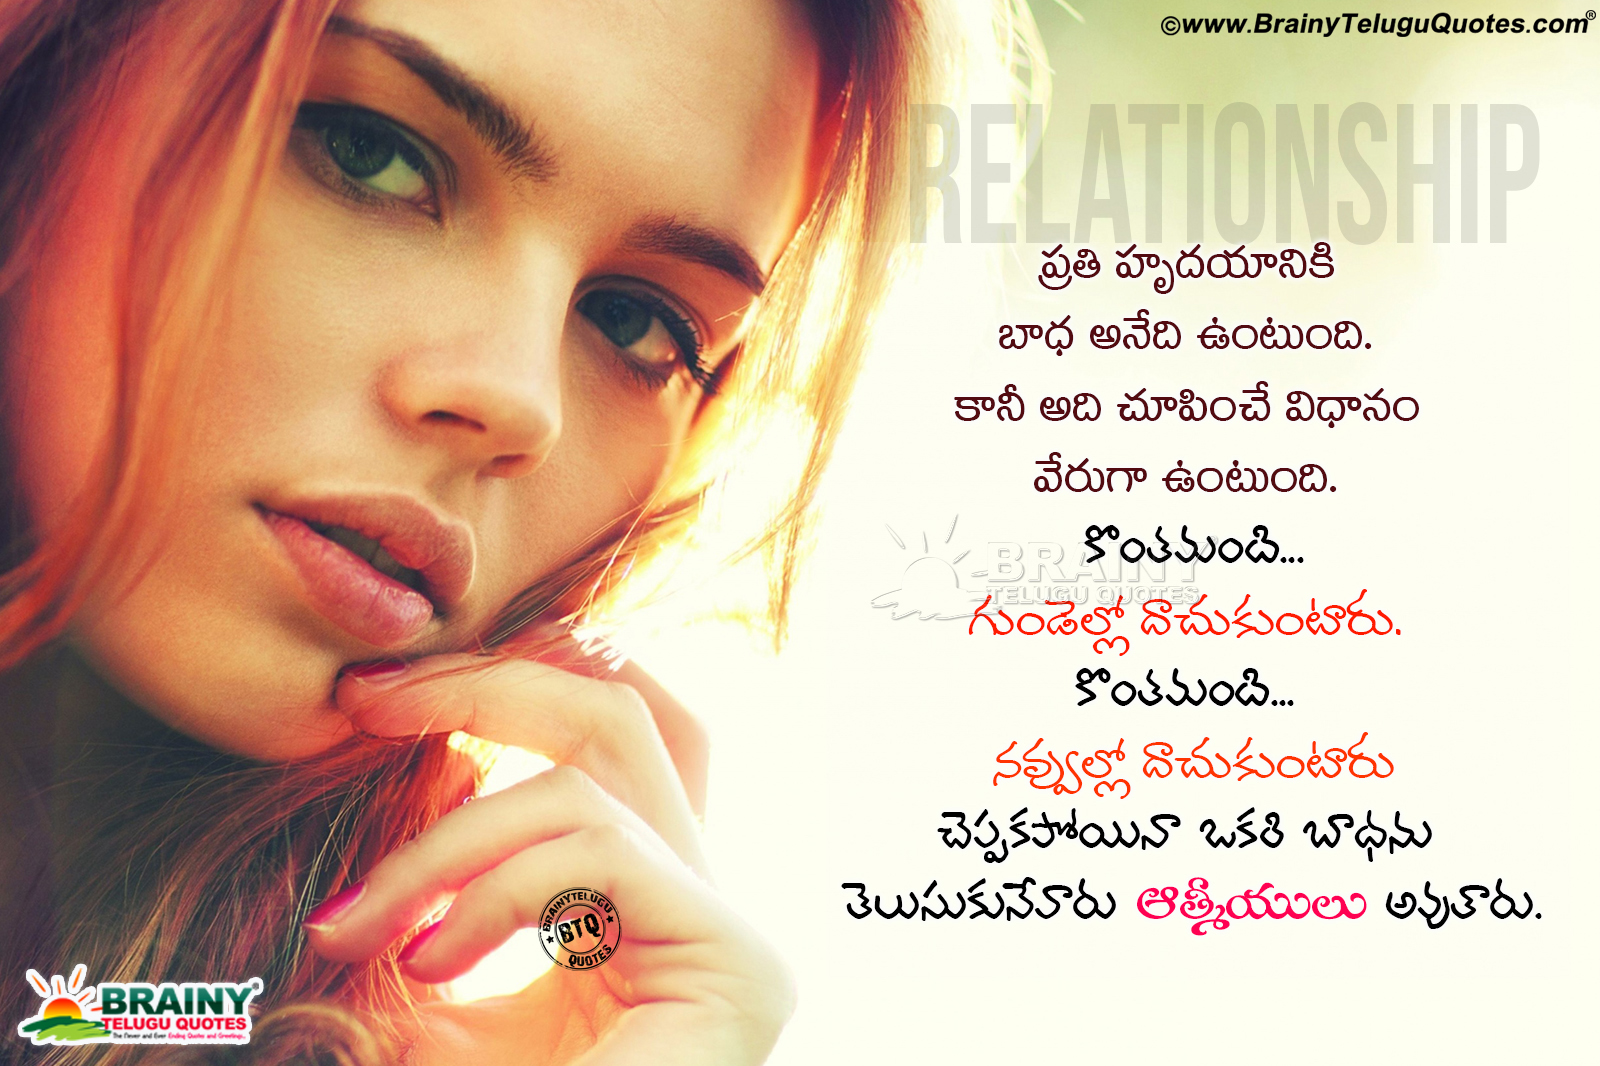 Telugu Heart Touching Relationship Quotes with Alone Girl ...